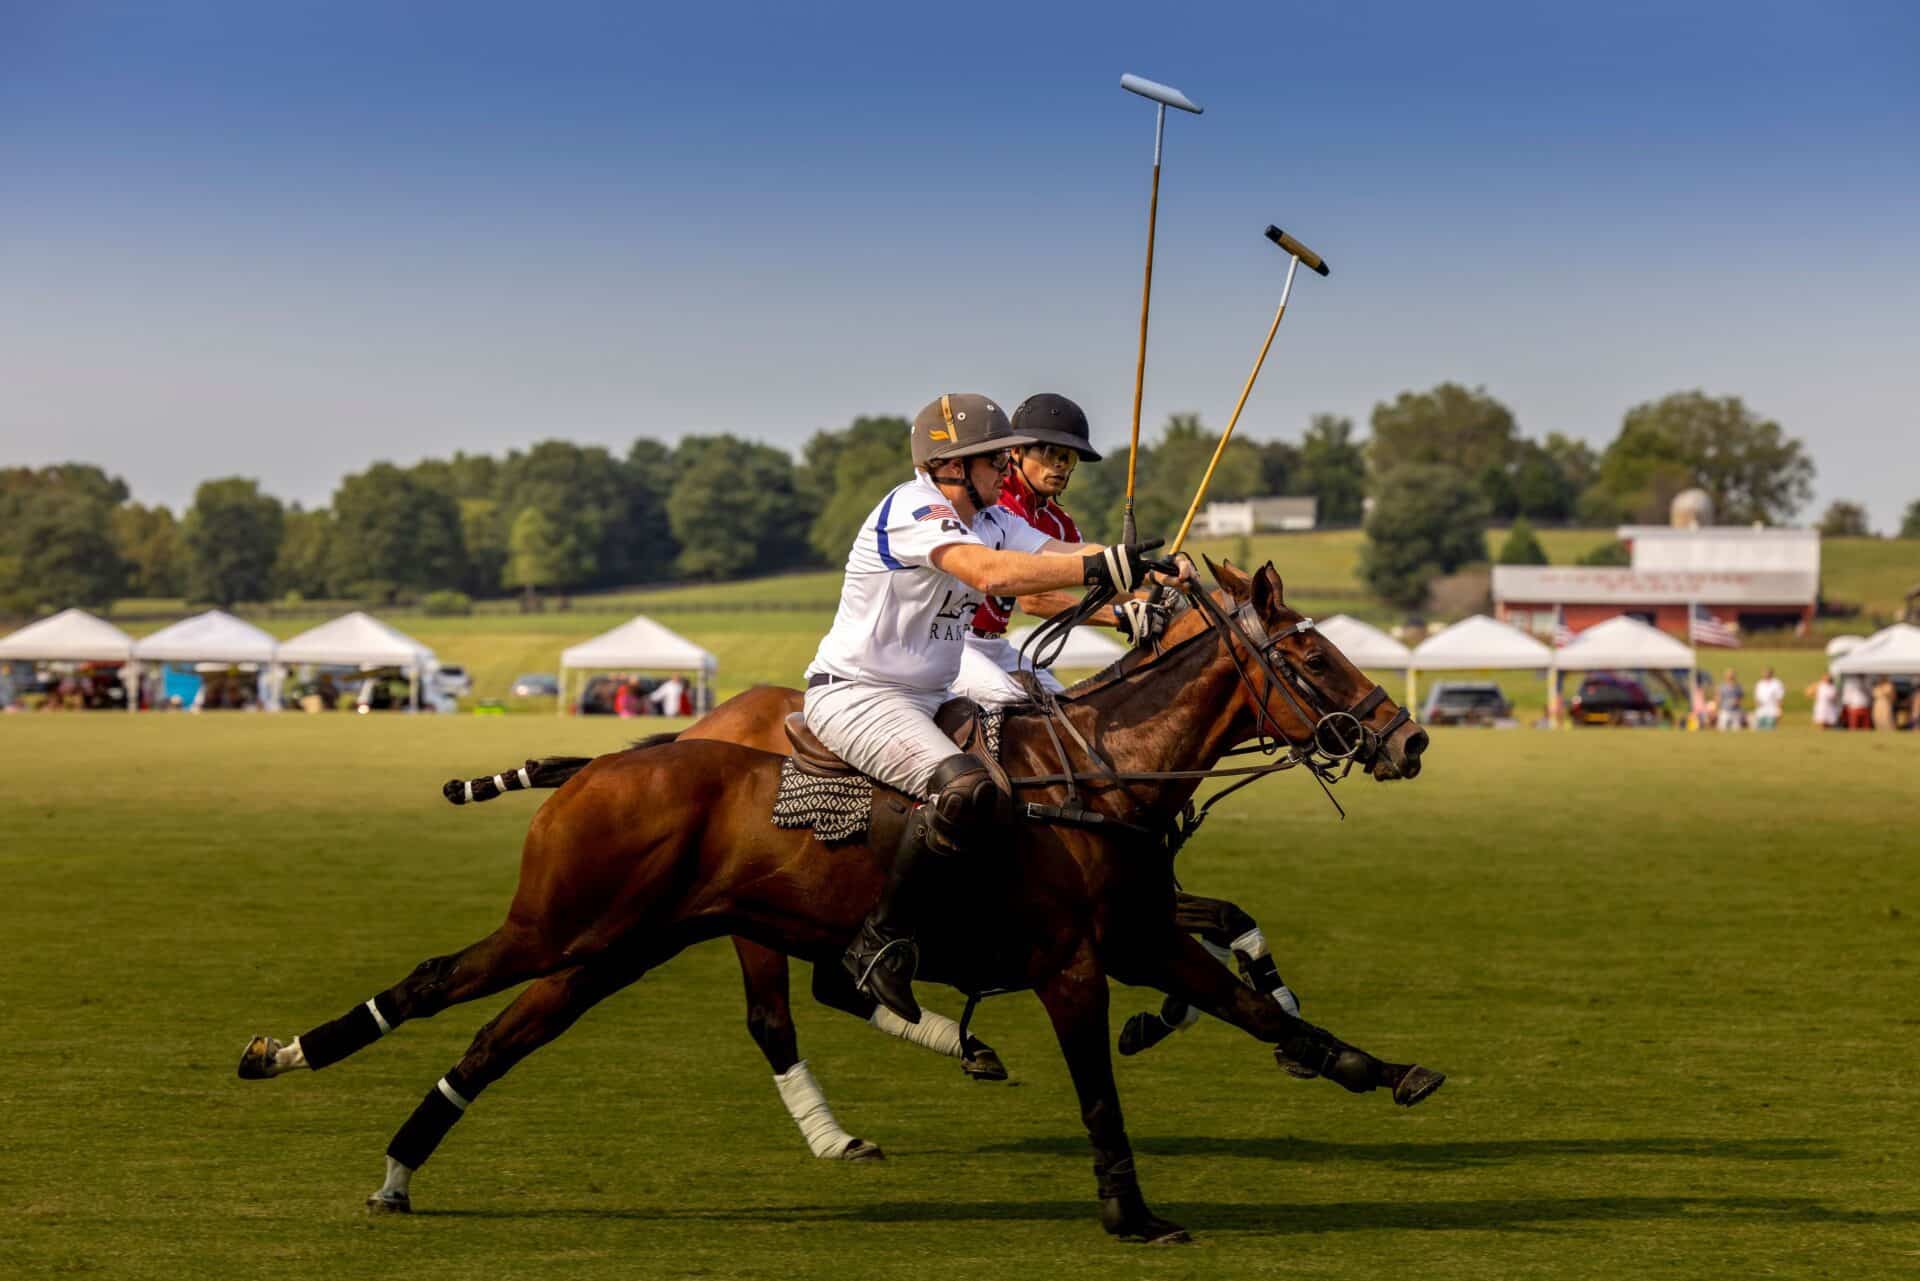 Polo action at Chukkers for Charity event in Franklin.